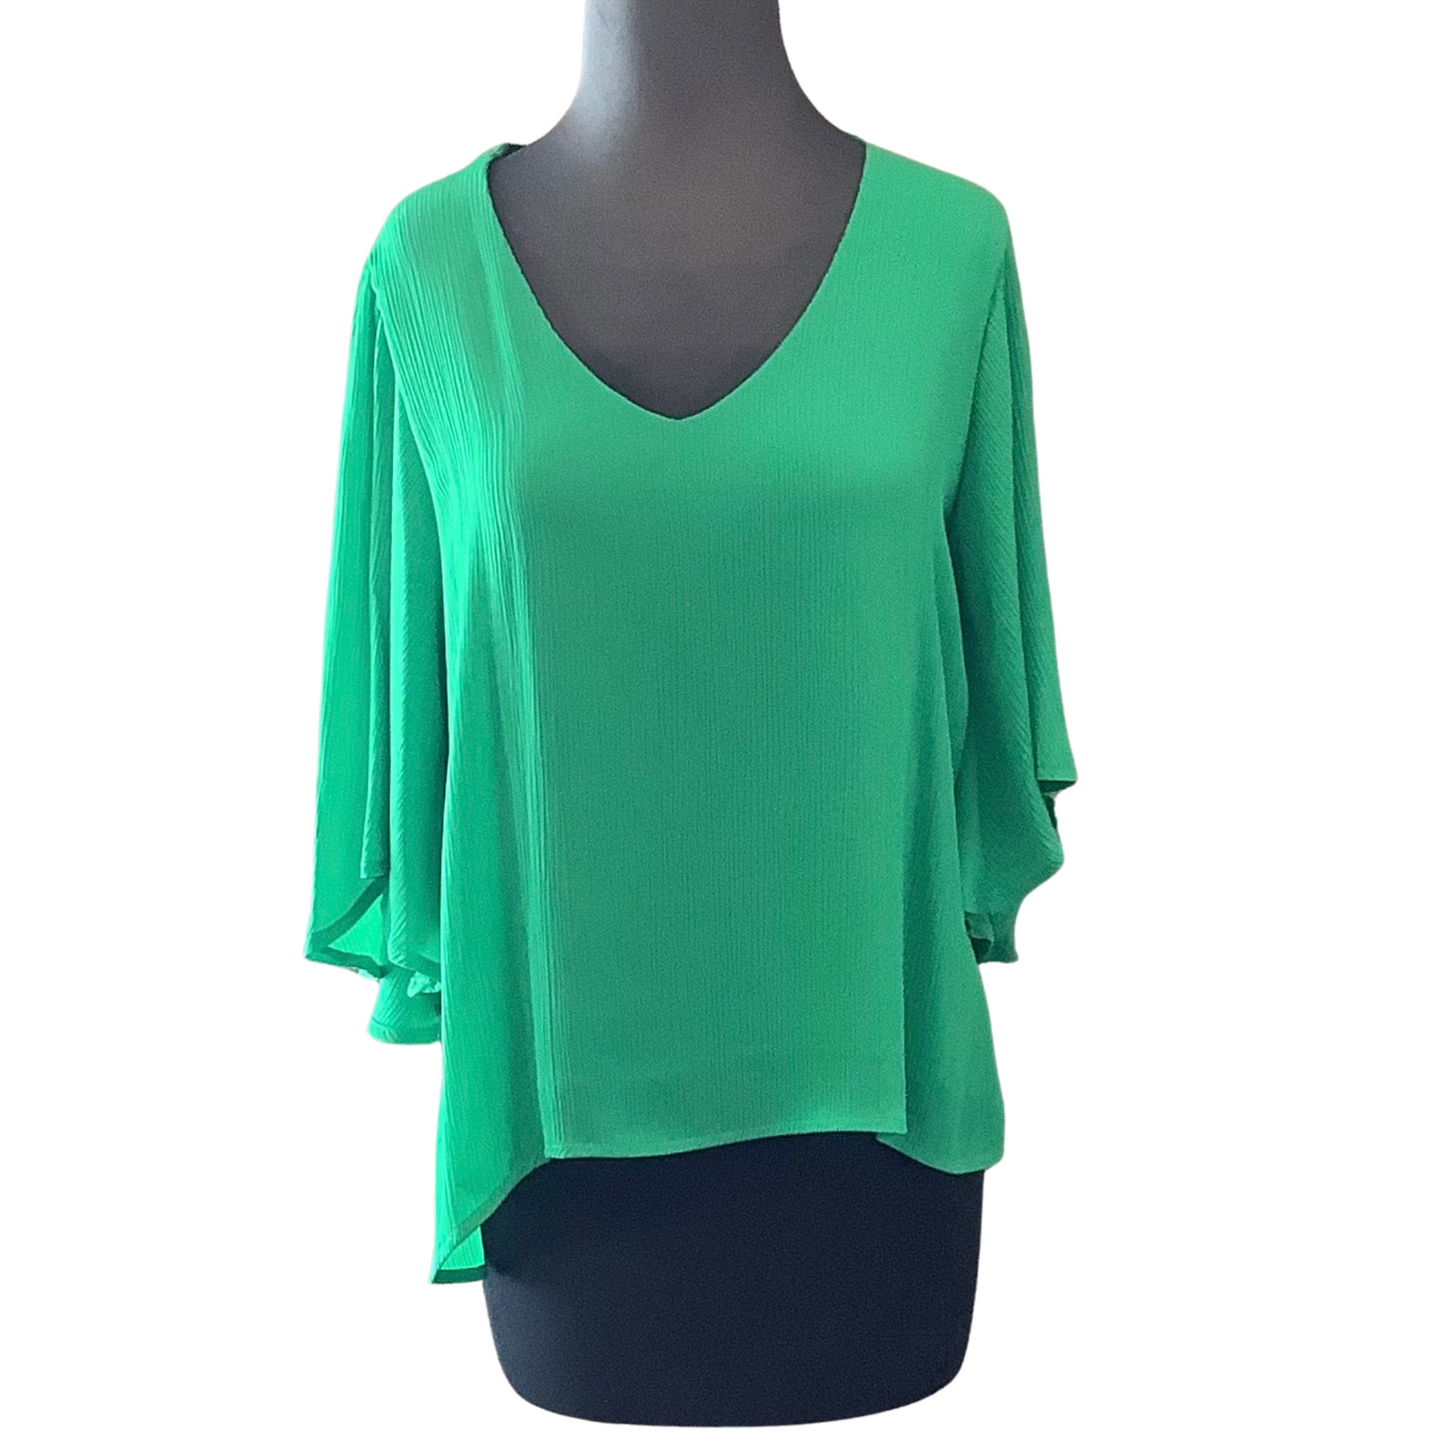 This short sleeve flowy top is perfect for summer days. Crafted from lightweight fabric, it features beautiful, draped sleeves in a vibrant green color. Its airy design ensures breathability and comfort. Perfect for warm weather.